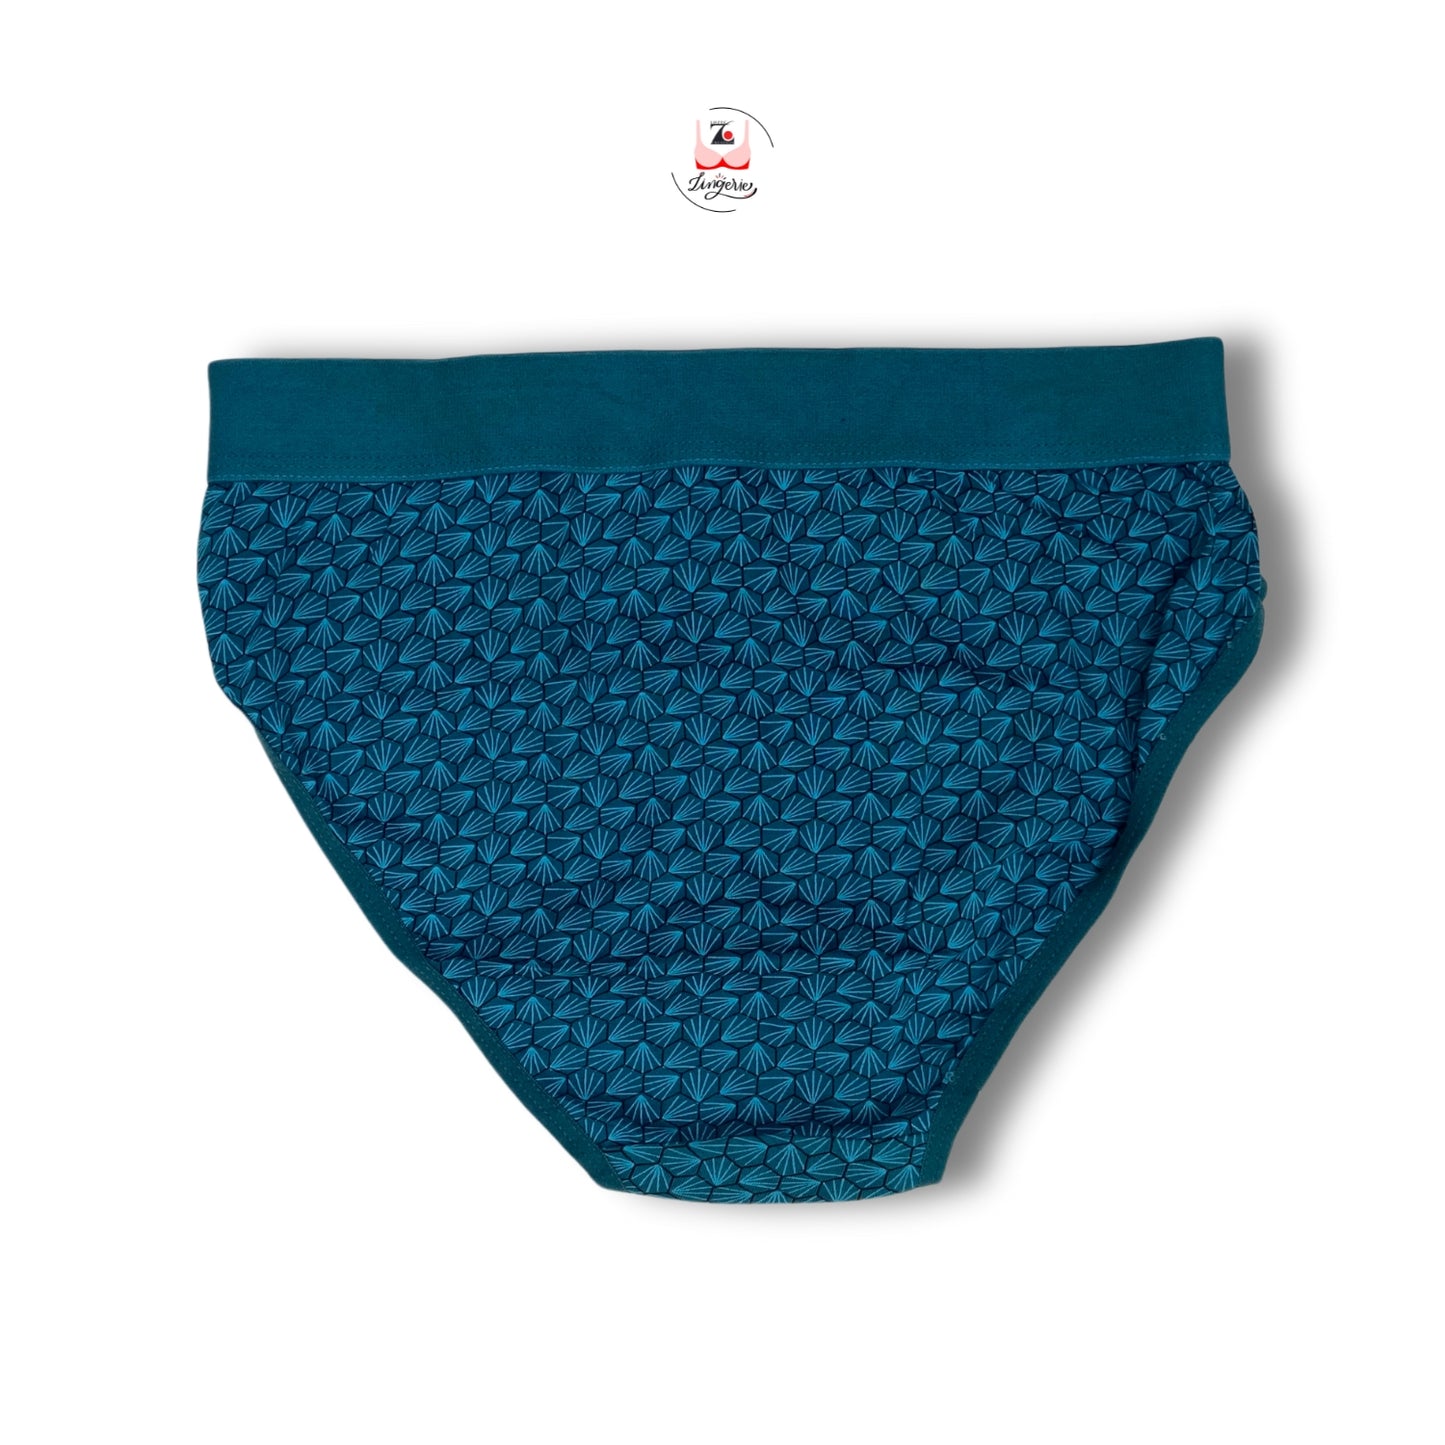 Hexagon Pattern Broad Waist Band Cotton Fabric Hipster Briefs- Pack of 3 Printed Colours